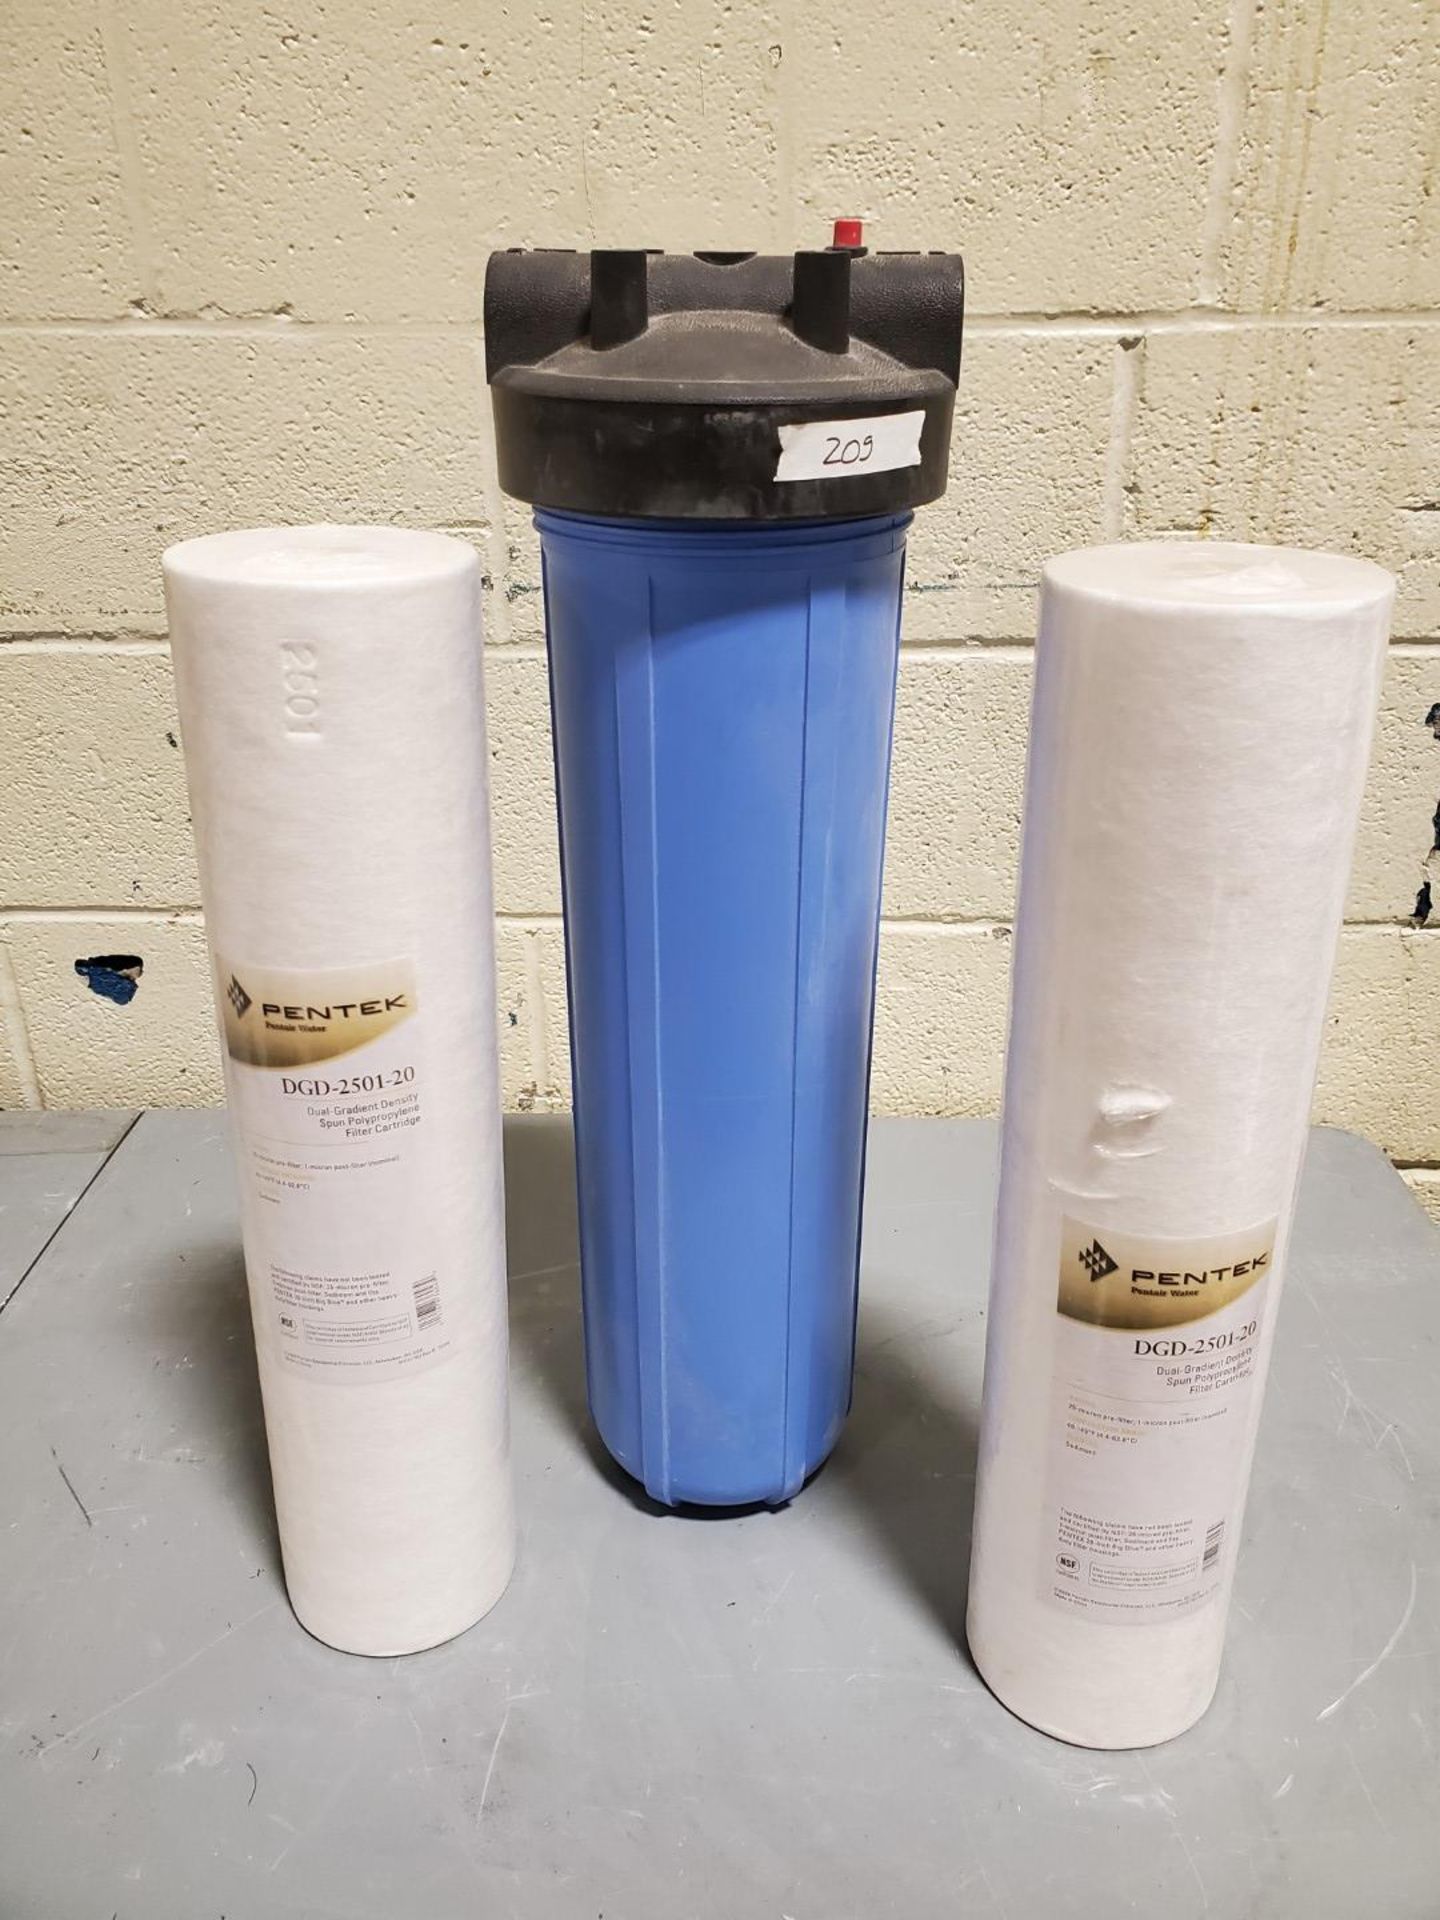 (2) Pentek Water Filter Cartriges, with Housing